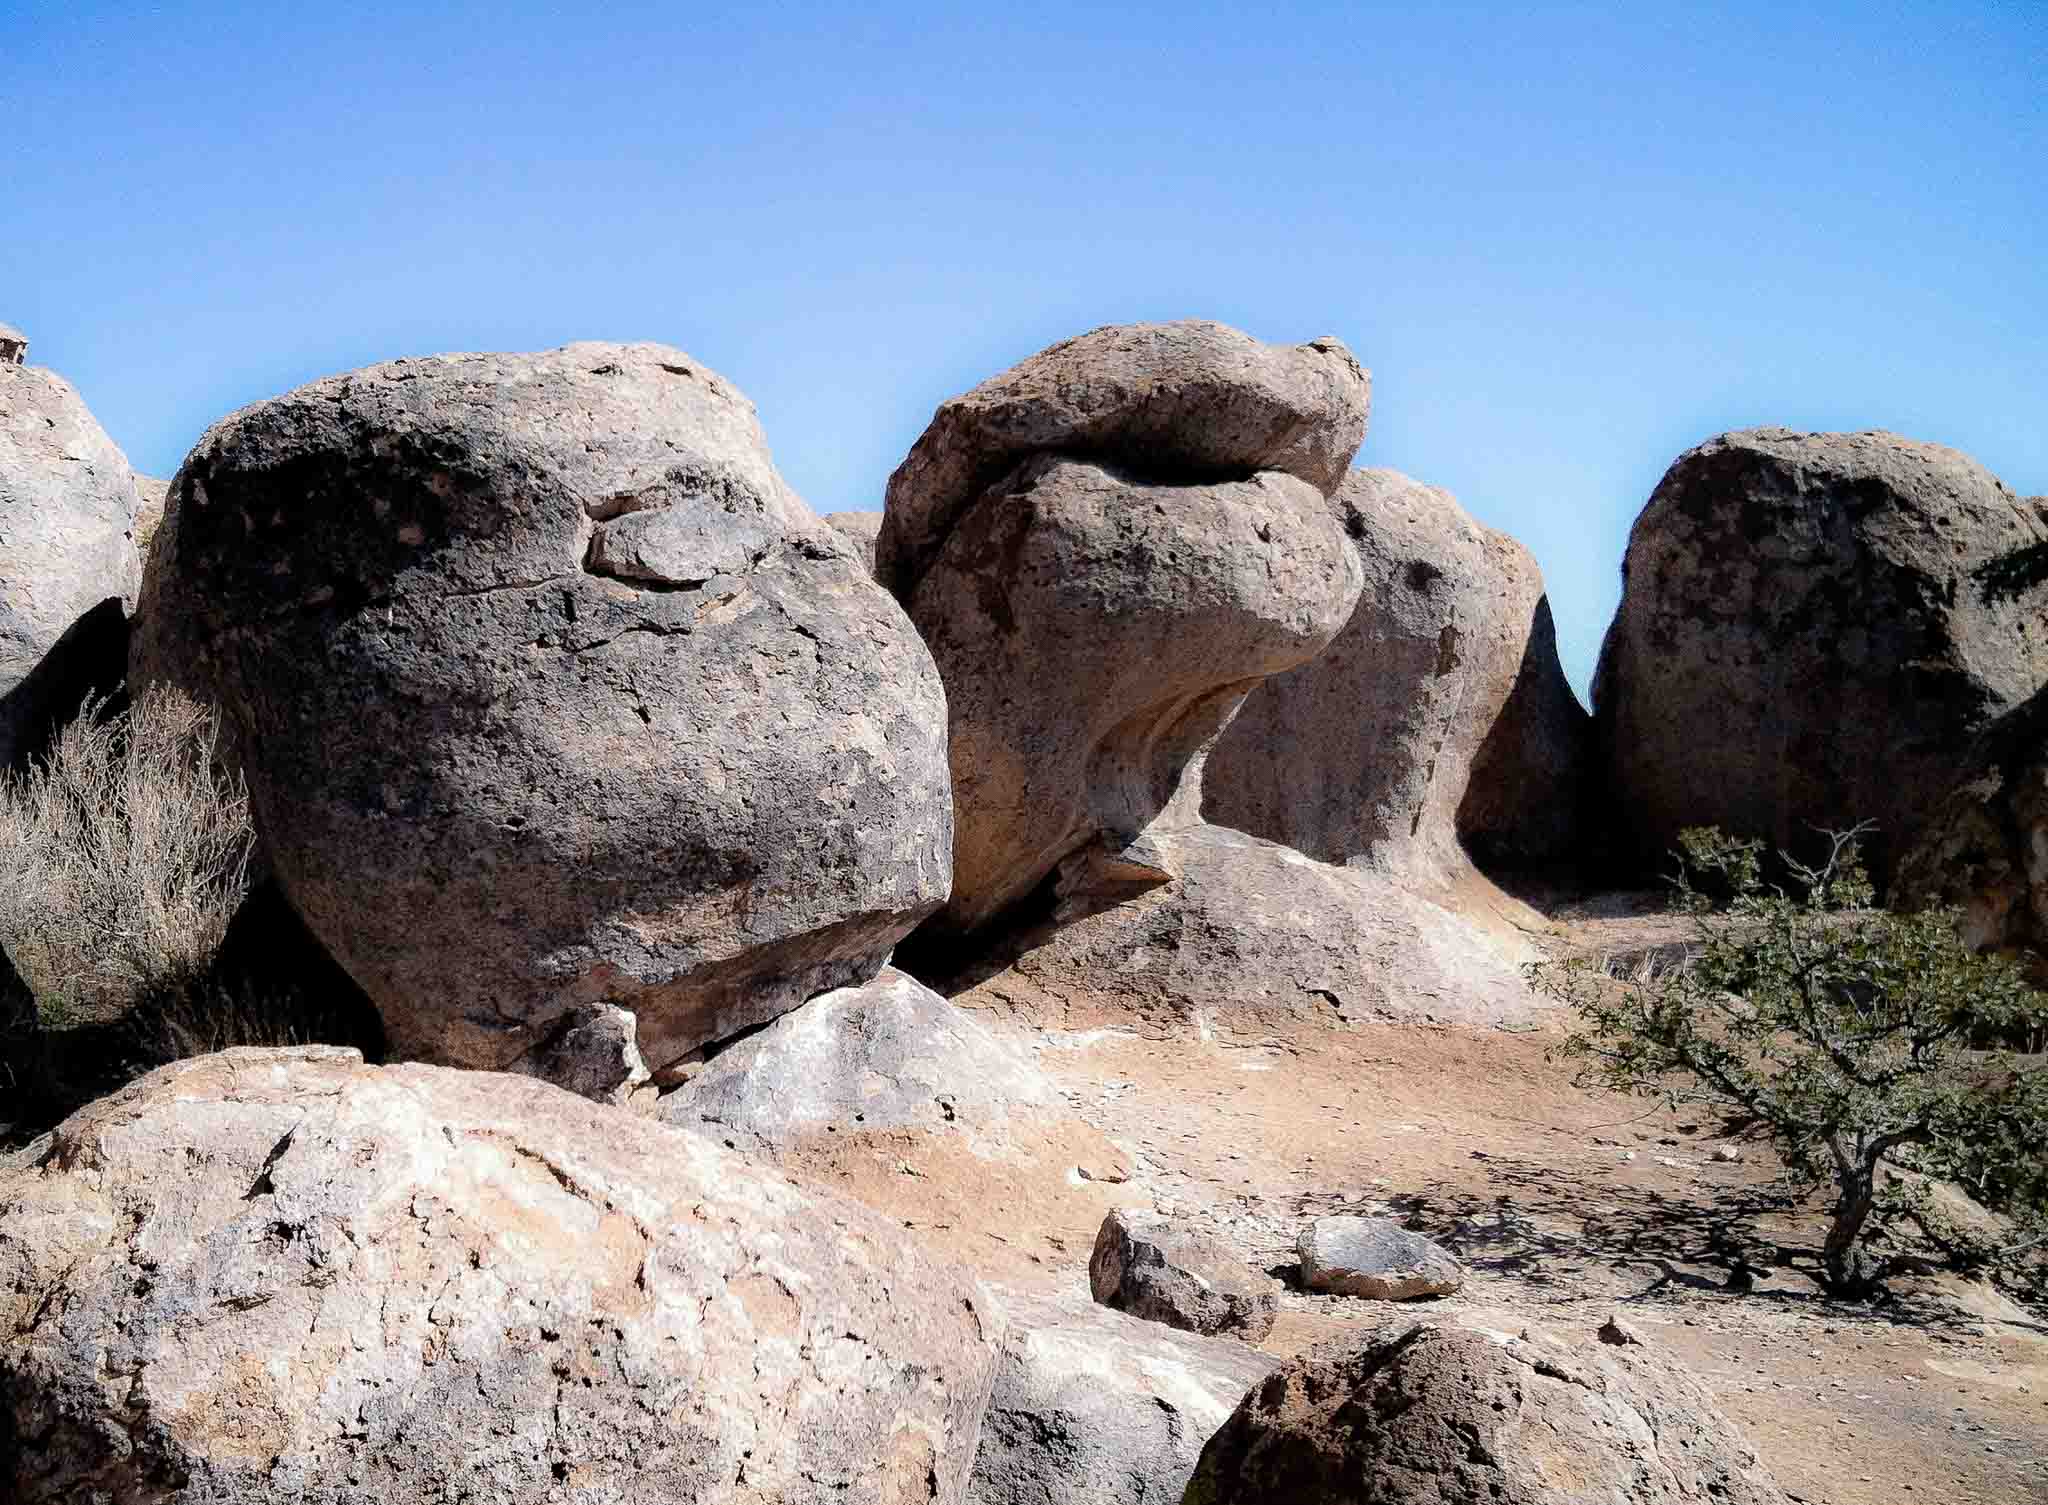 Rock formation showing pareidolia, City of Rocks State Park, Faywood NM, March 2, 2012